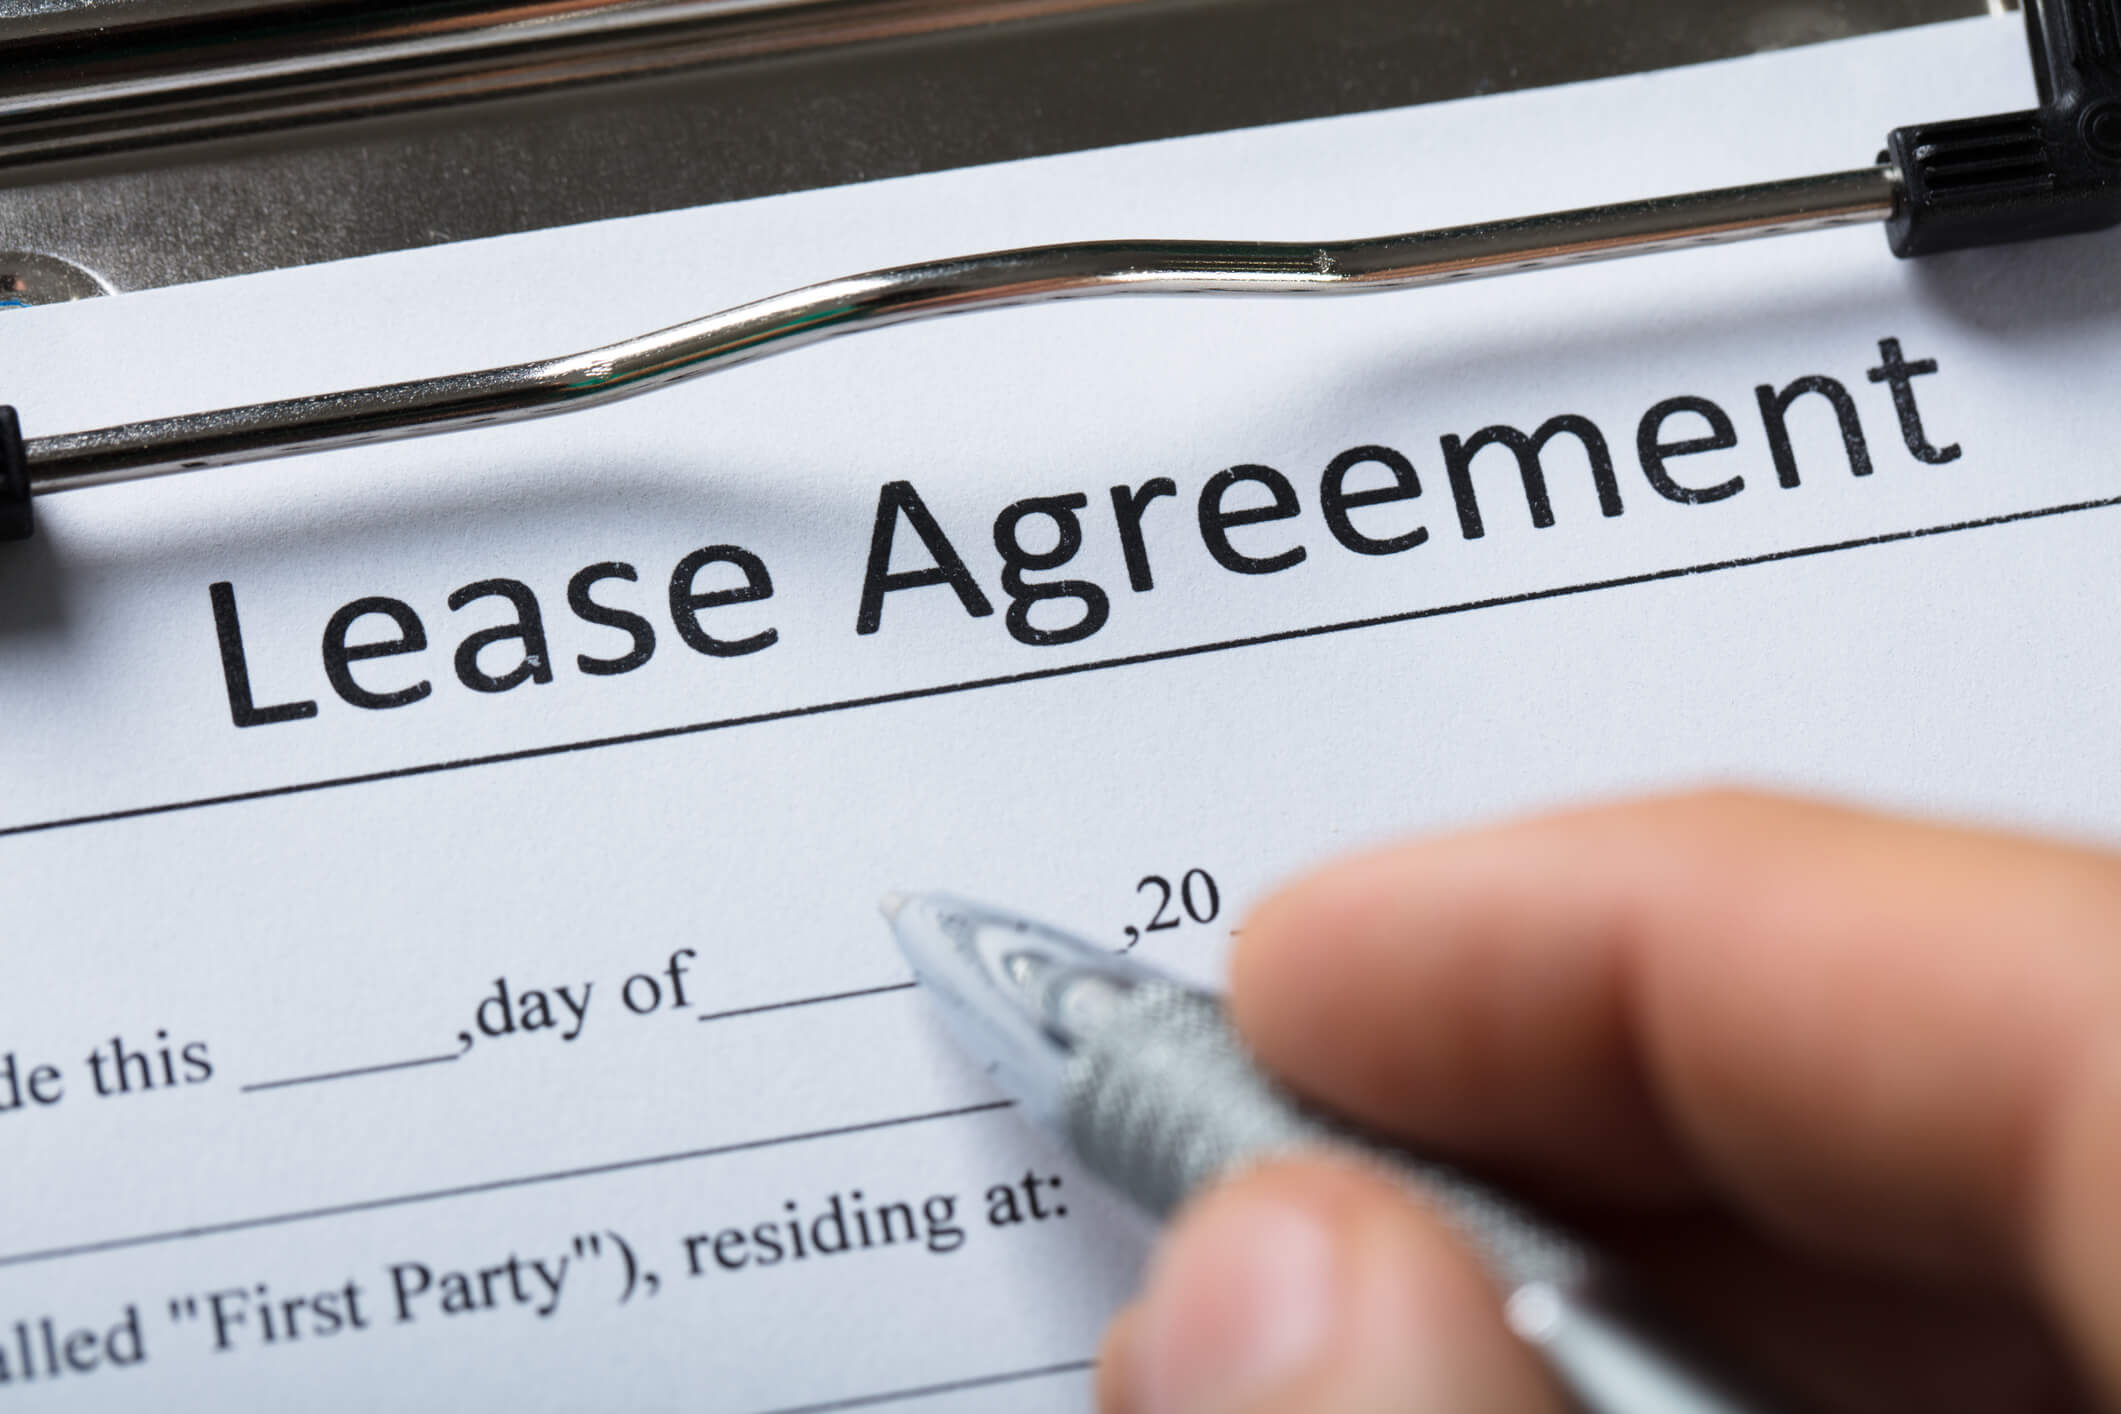 sample lease agreement drafted by professional property management company in henderson